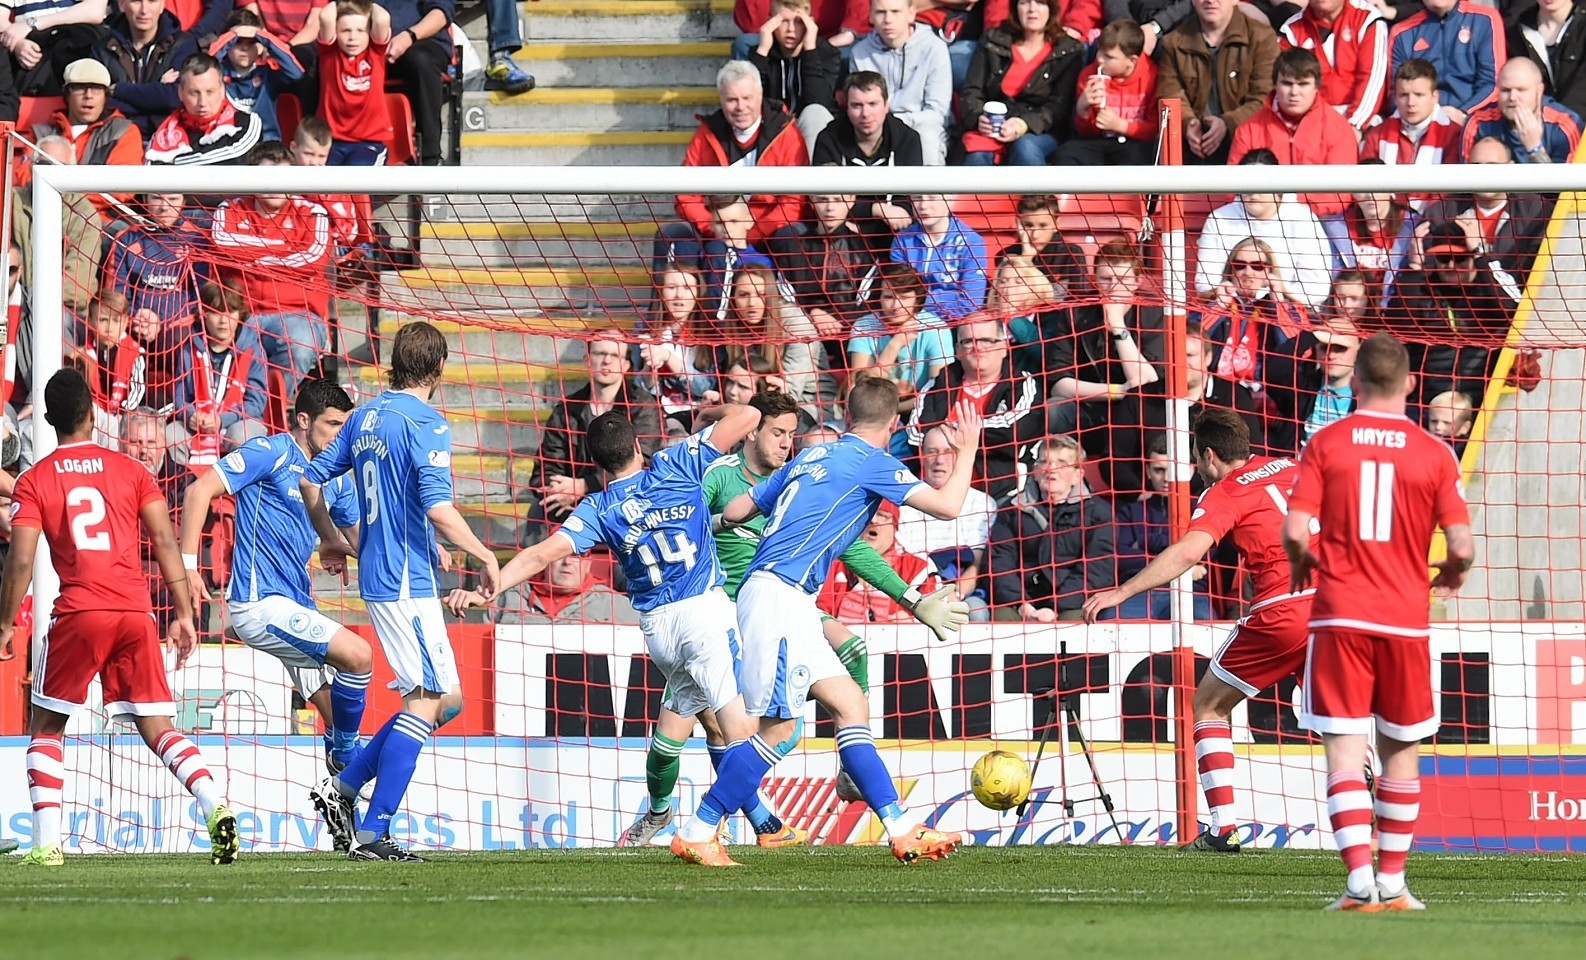 St Johnstone won 5-1 at Pittodrie in October.